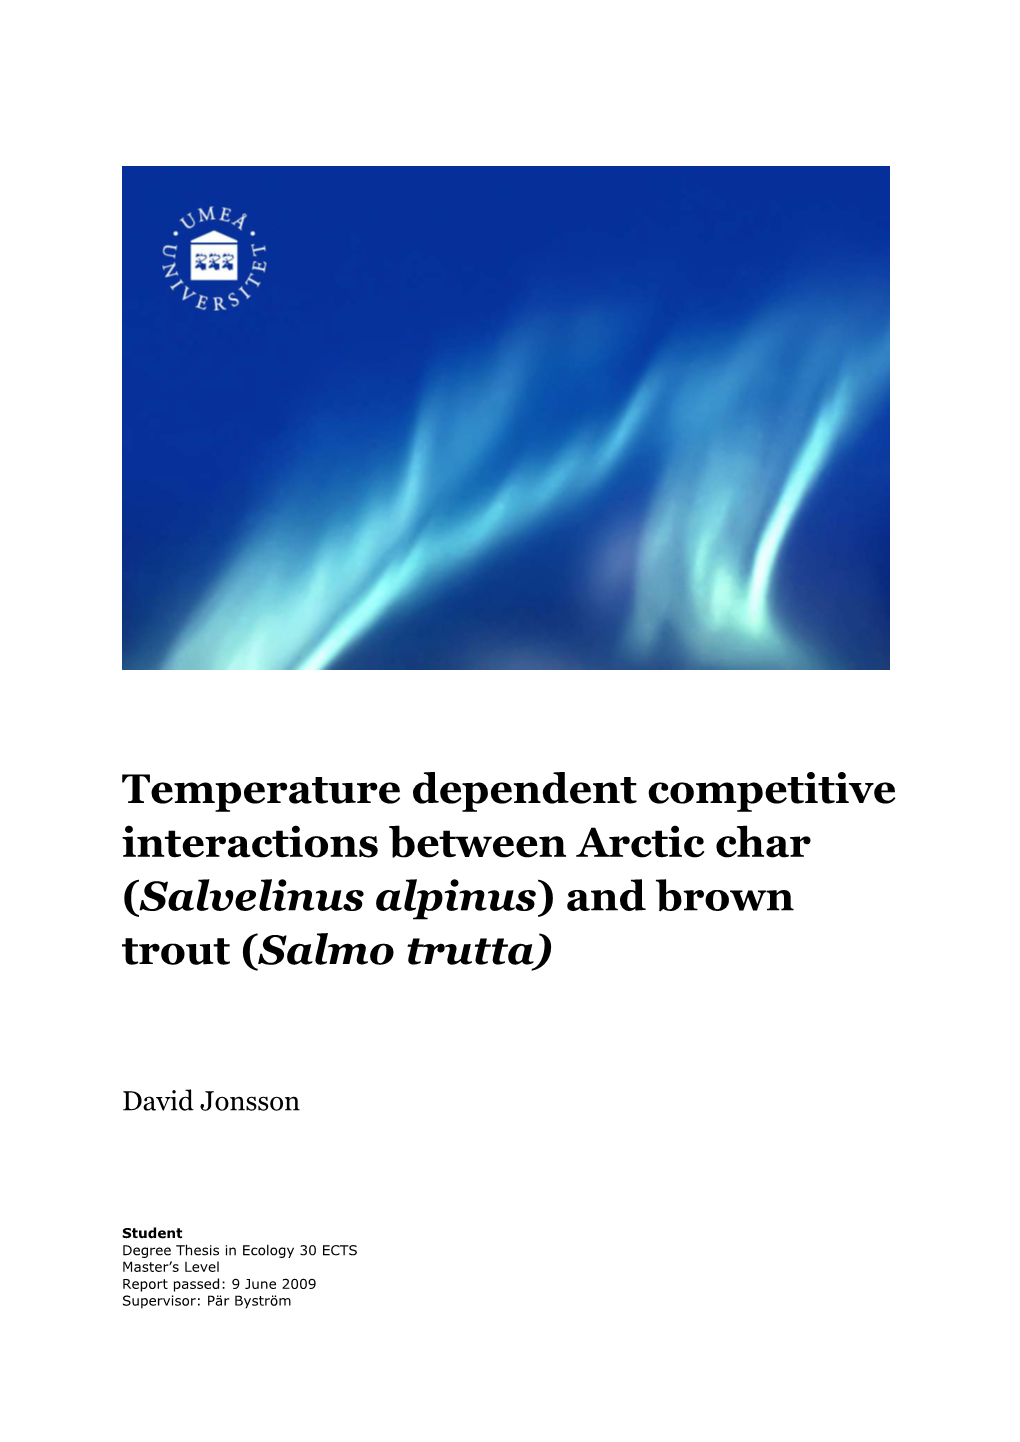 Temperature Dependent Competitive Interactions Between Arctic Char (Salvelinus Alpinus) and Brown Trout (Salmo Trutta)